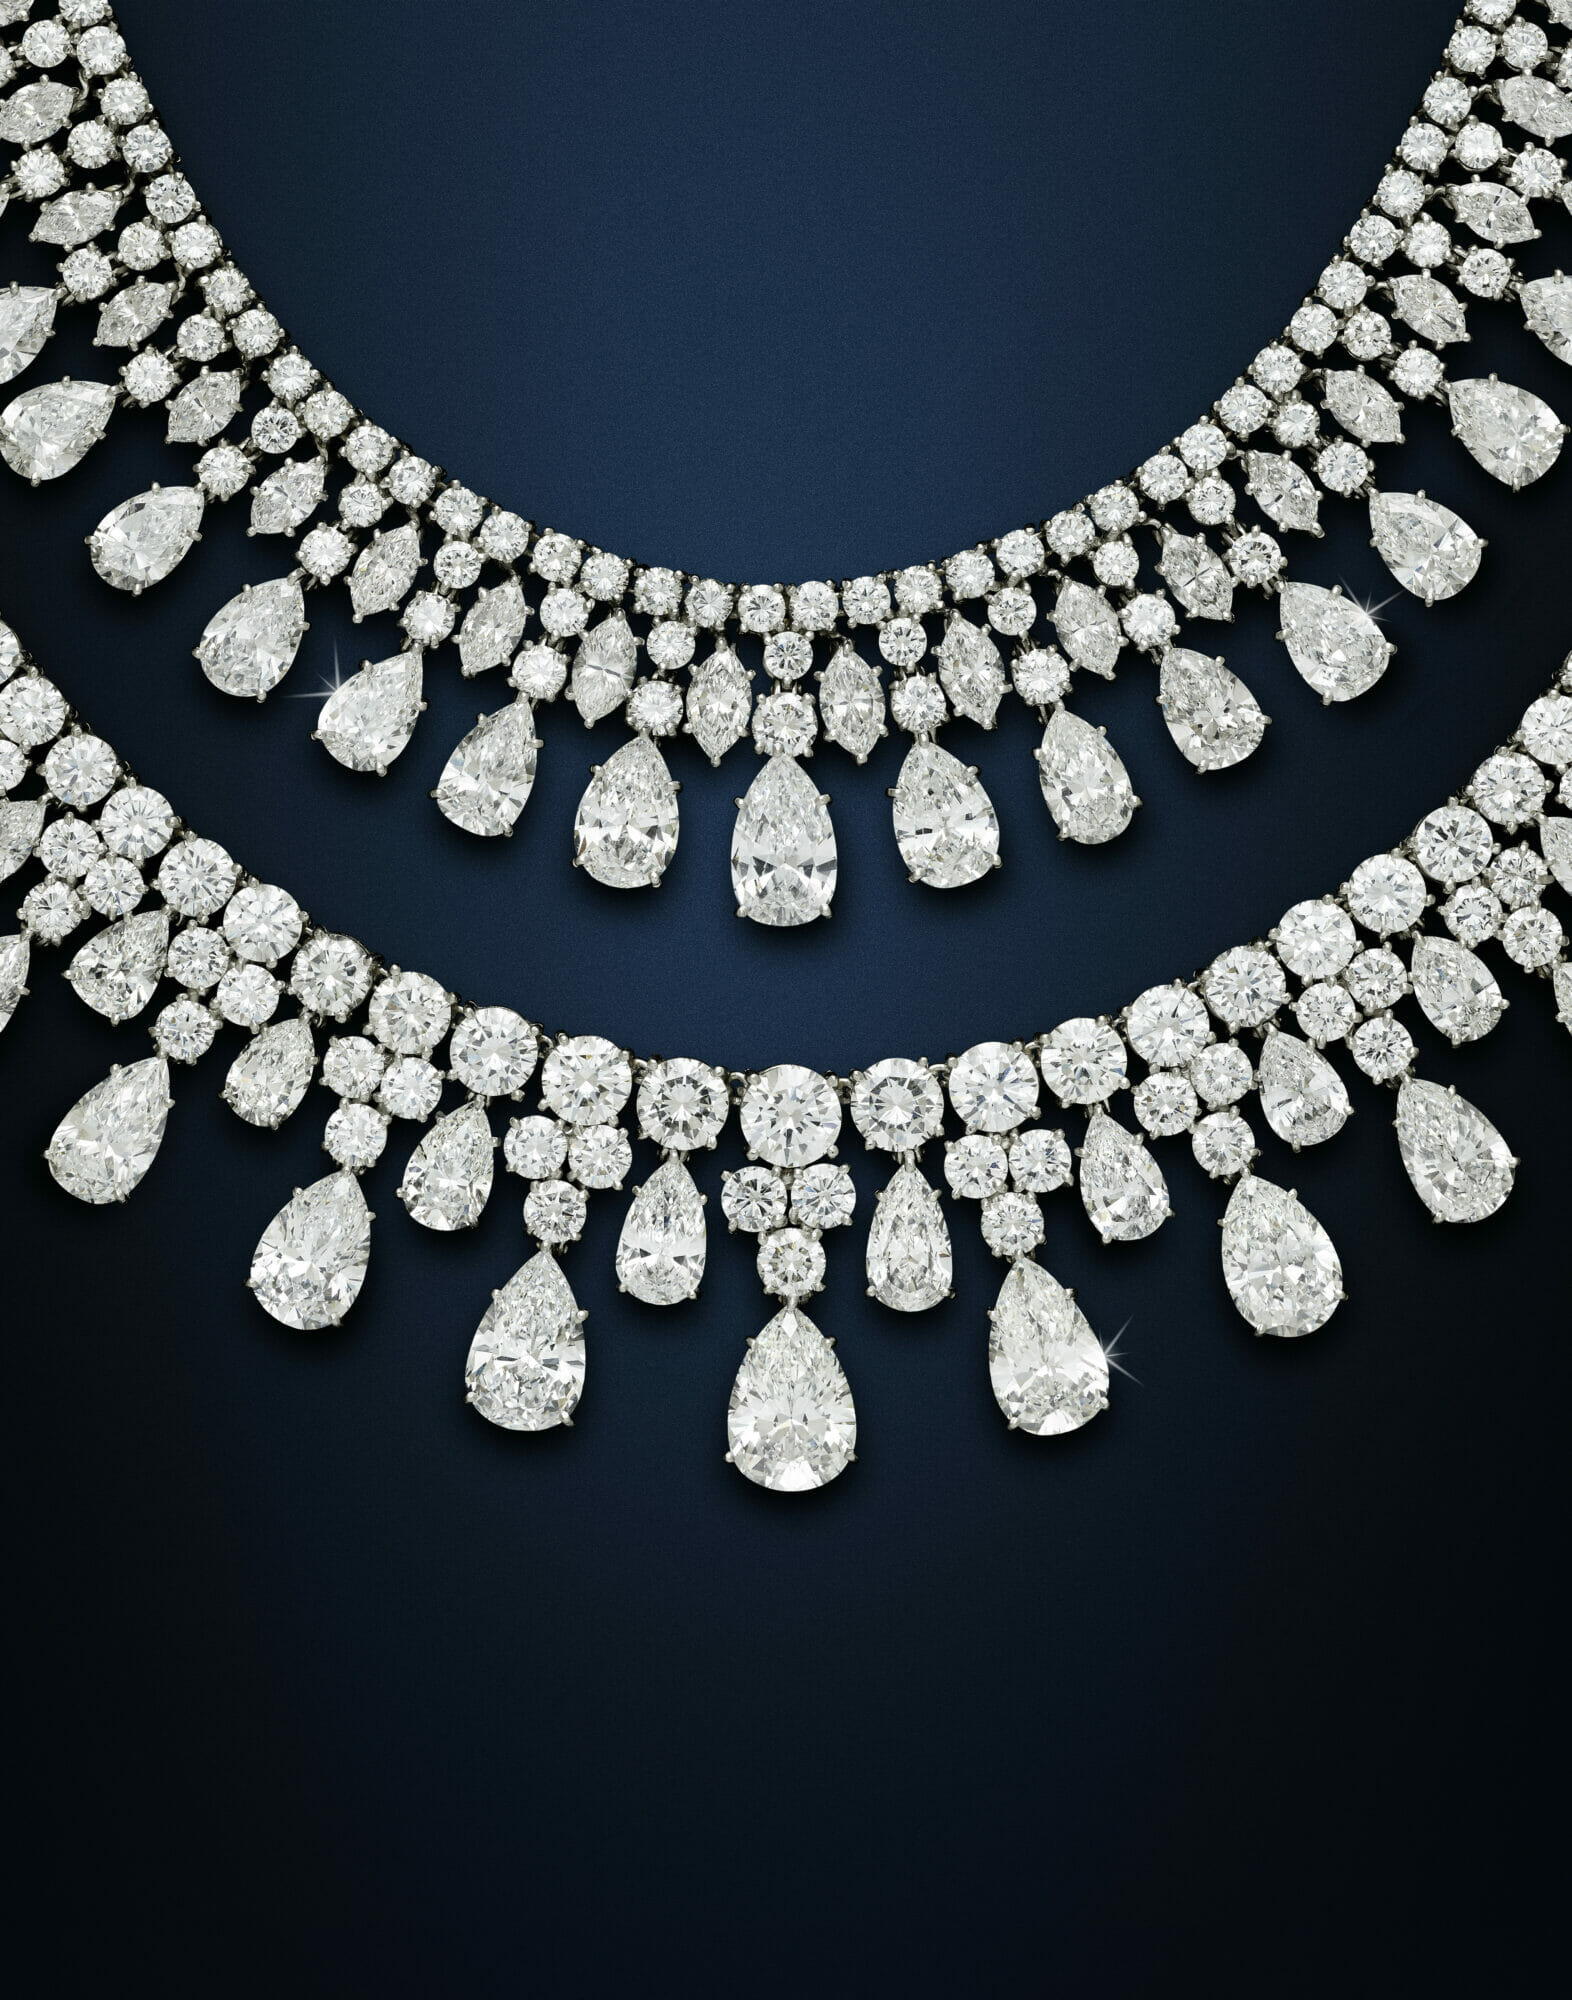 Two important diamond necklaces by Harry Winston, sold at a Bonhams New York auction